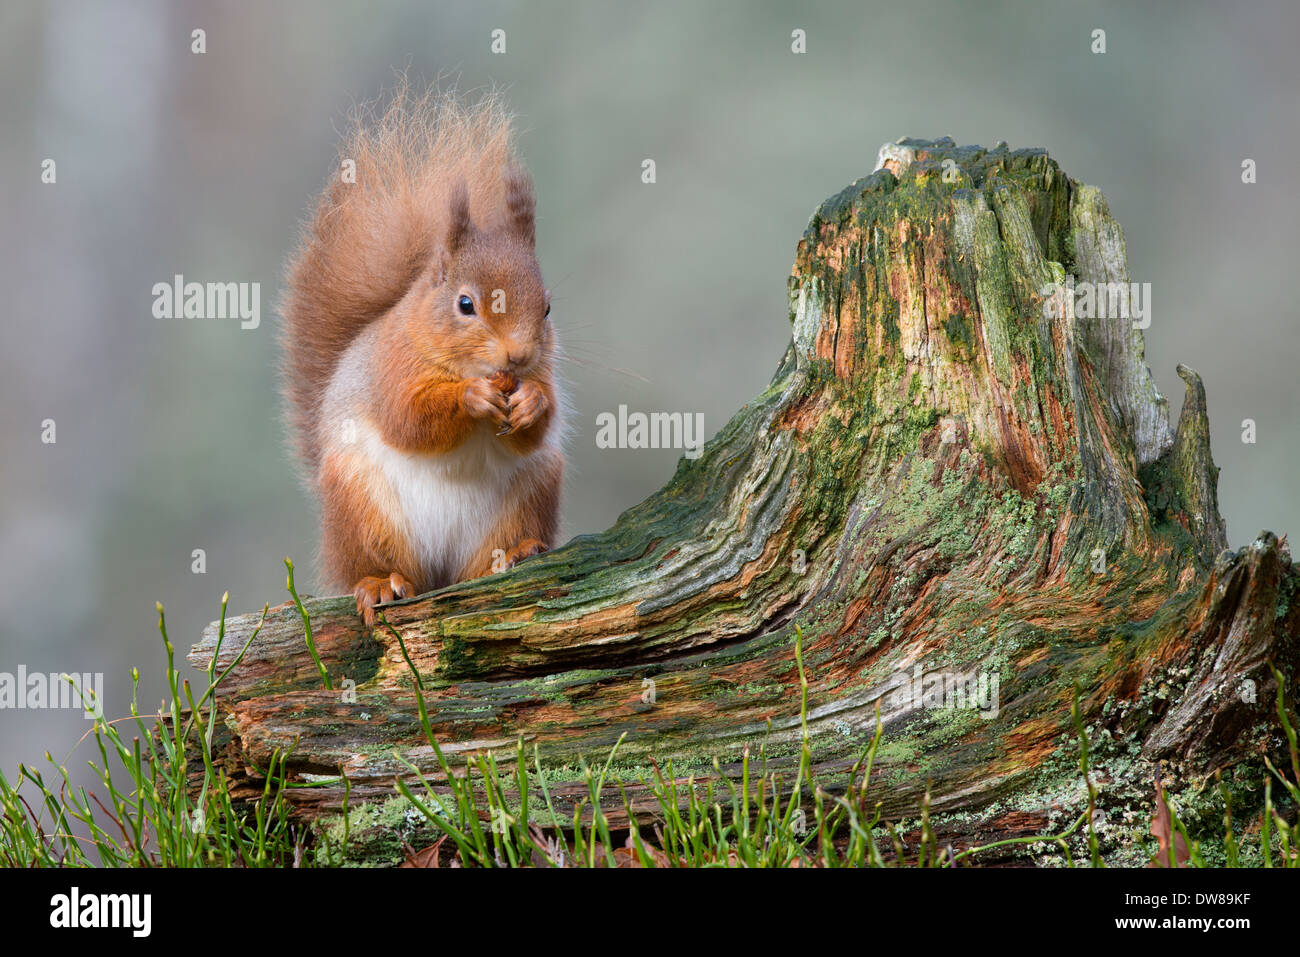 red squirrel sitting on a old tree stump looking forward Stock Photo